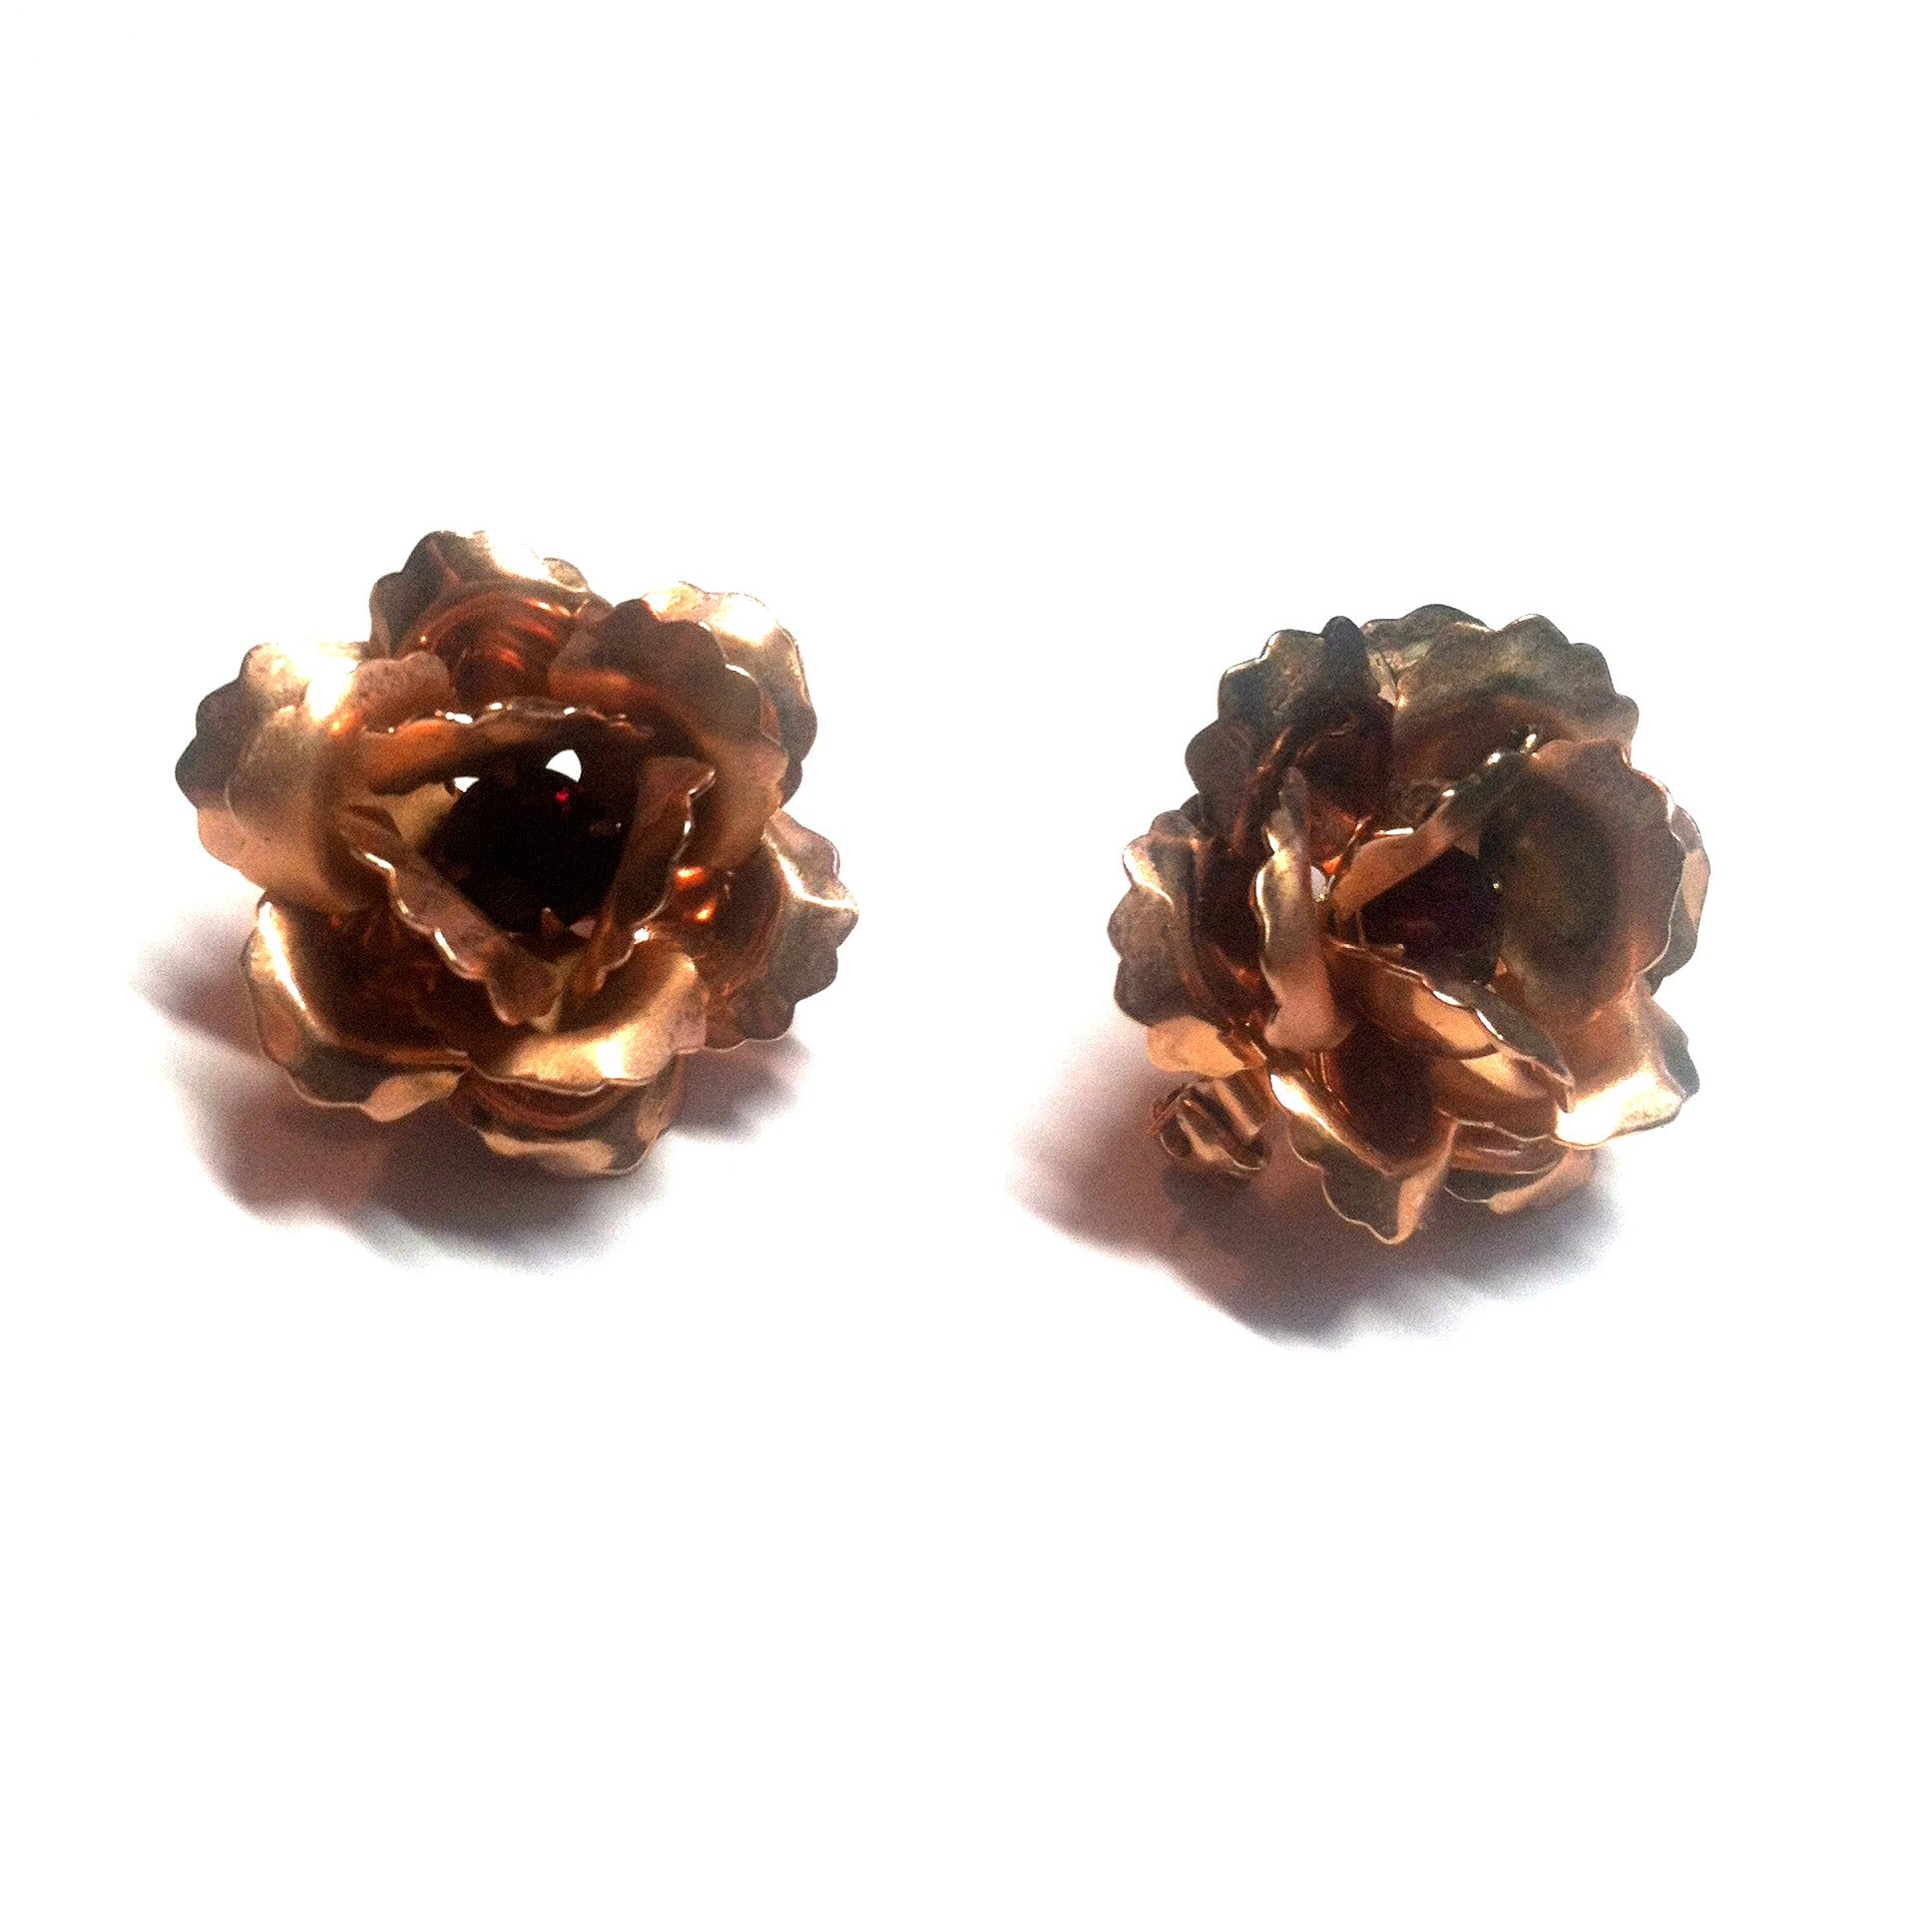 Copper Sculpted Rose Pair of Brooches w/ Red Rhinestones circa 1940s Dorothea's Closet Vintage Jewelry